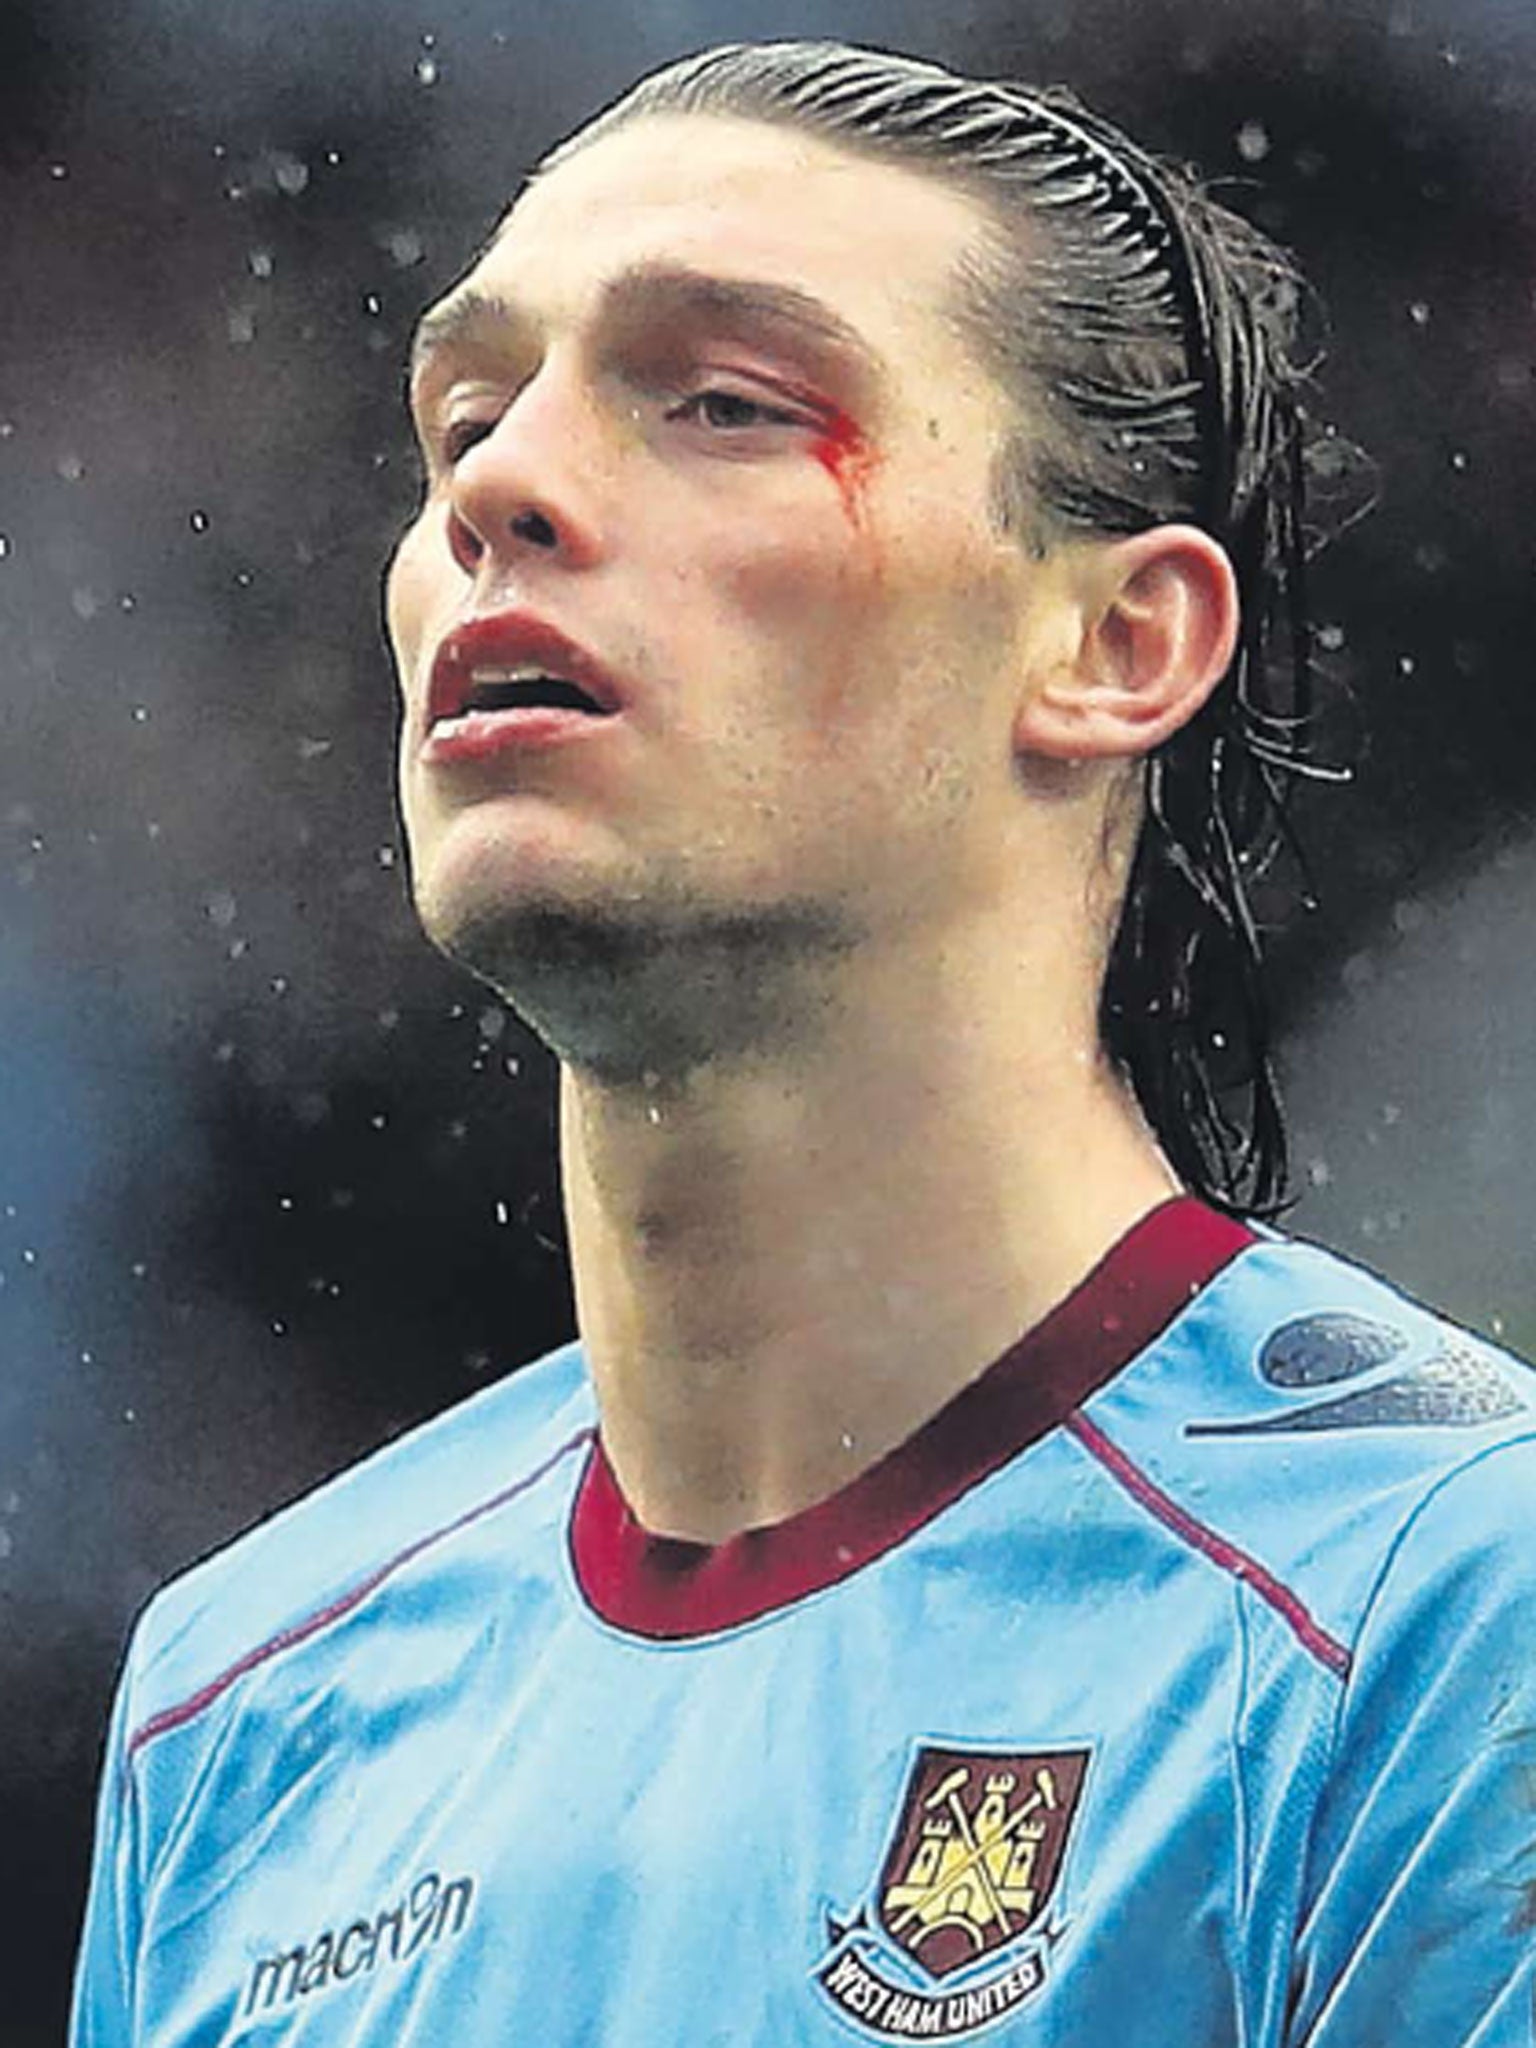 Andy Carroll has scored two goals so far this season for West Ham